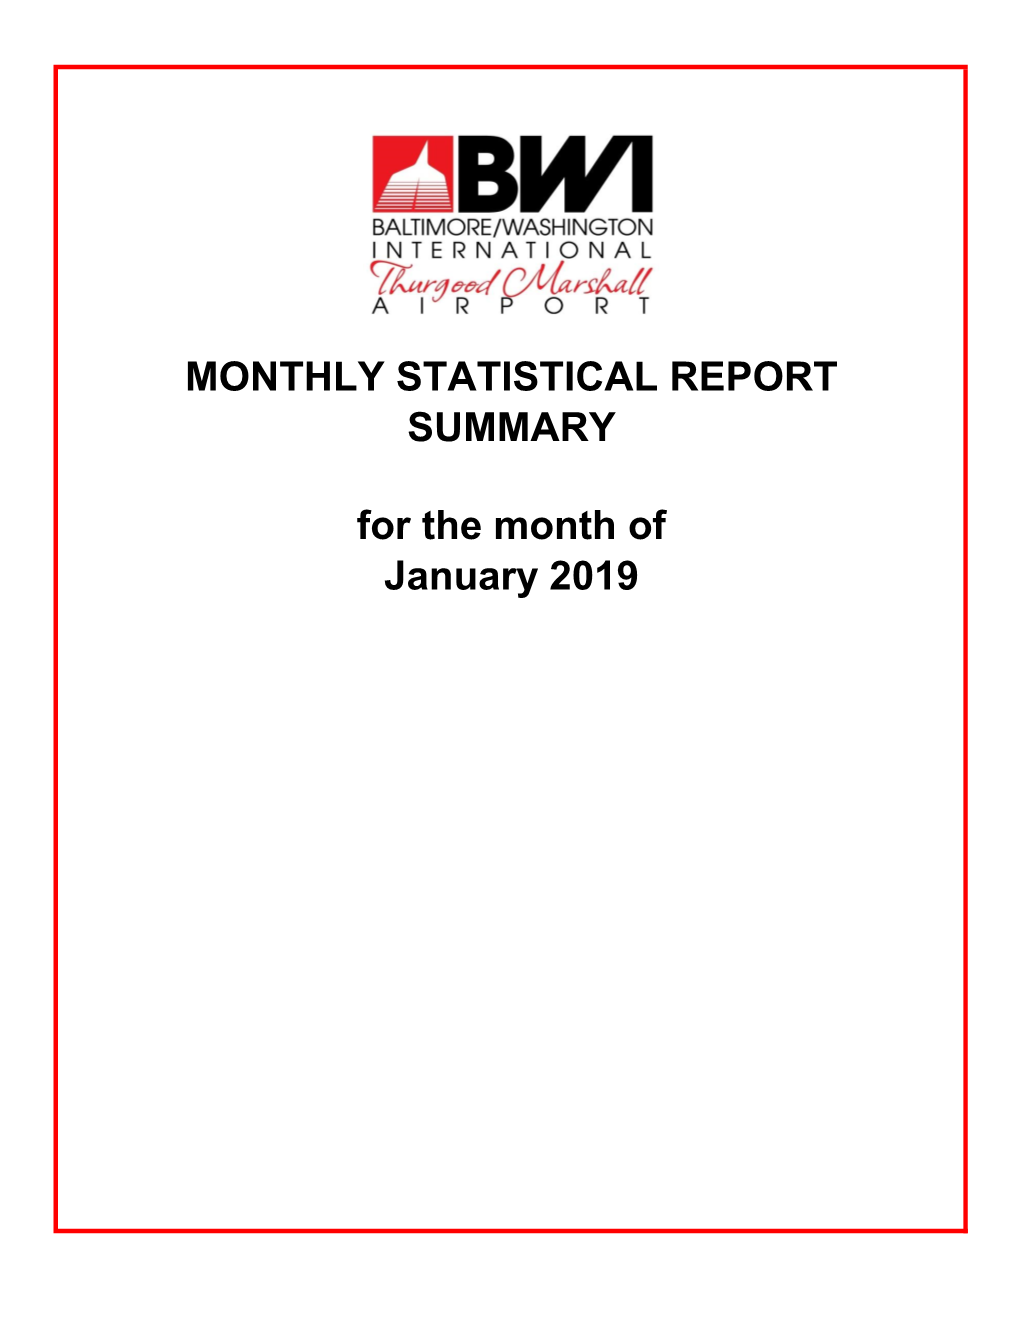 MONTHLY STATISTICAL REPORT for the Month of January 2019